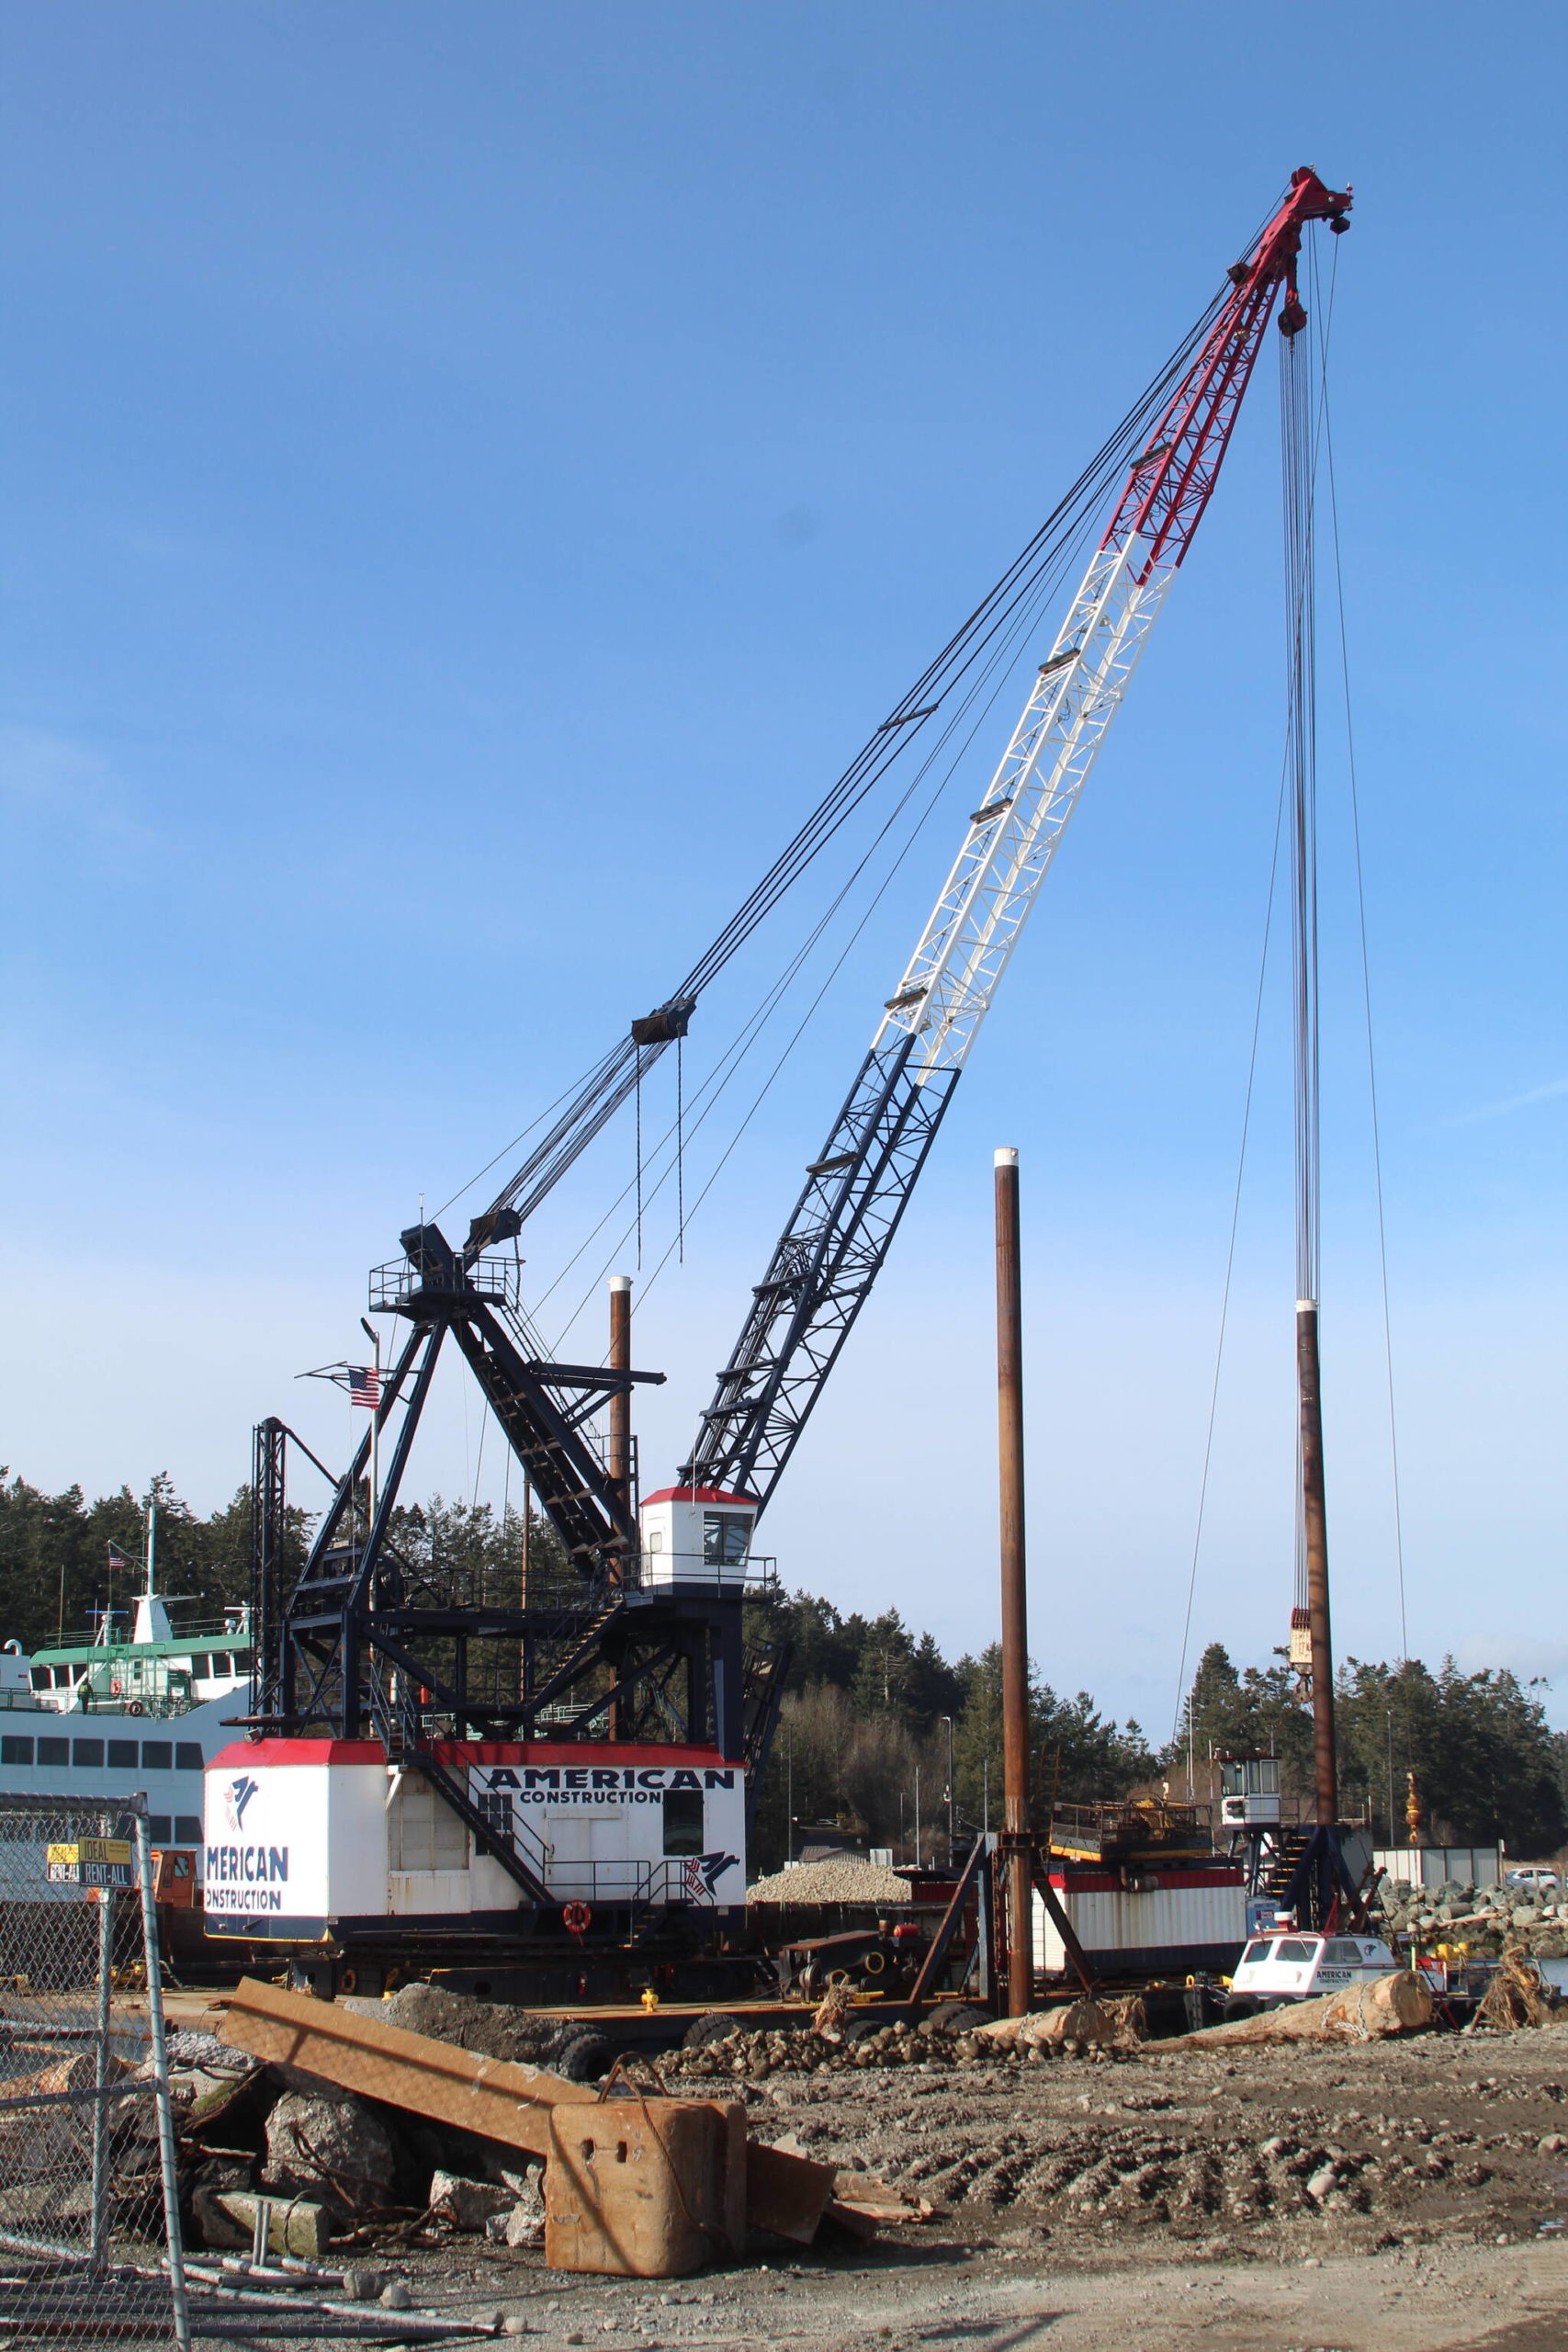 Photo by Karina Andrew/Whidbey News-Times
Construction is in full swing at the Keystone Boat Launch near the Coupeville ferry terminal.